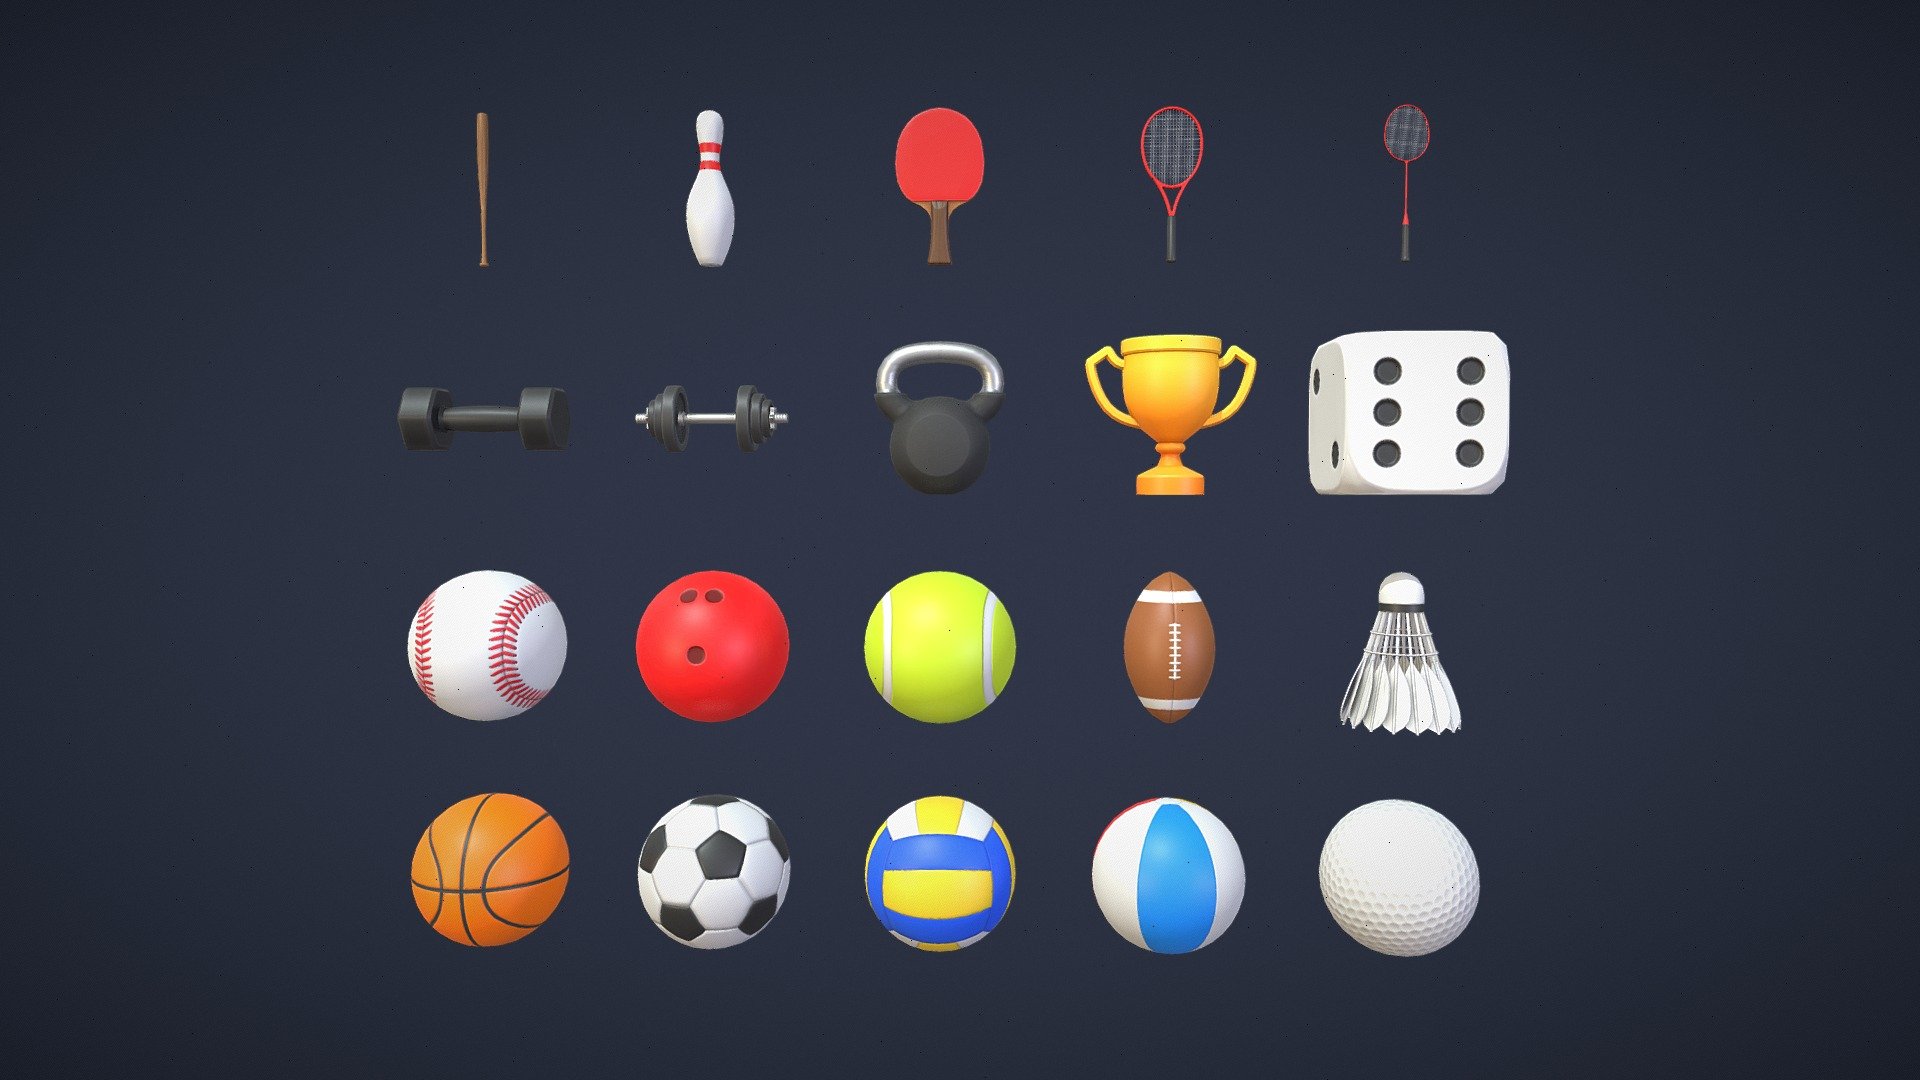 Pack of 20 different models of sports equipment

Pack include:




Badminton racket - 1 540 tris

Baseball bat - 432 tris

Baseball - 768 tris

Basketball - 768 tris

Beach ball - 768 tris

Bowling ball - 768 tris

Bowling pin - 672 tris

Dice - 332 tris

Dumbbells - 3 680 tris

Fitness dumbbells - 408 tris

Football - 960 tris

Golf ball - 768 tris

Kettlebell - 960 tris

Shuttlecock - 1 648 tris

Soccer ball - 768 tris

Table tennis paddle - 848 tris

Tennis ball - 768 tris

Tennis recquet - 1 266 tris

Trophy - 1 512 tris

Volleyball - 768 tris

Texture dimensions: 2048 x 2048 png - Sports Equipment Pack - Buy Royalty Free 3D model by Andrii Sedykh (@andriisedykh) 3d model